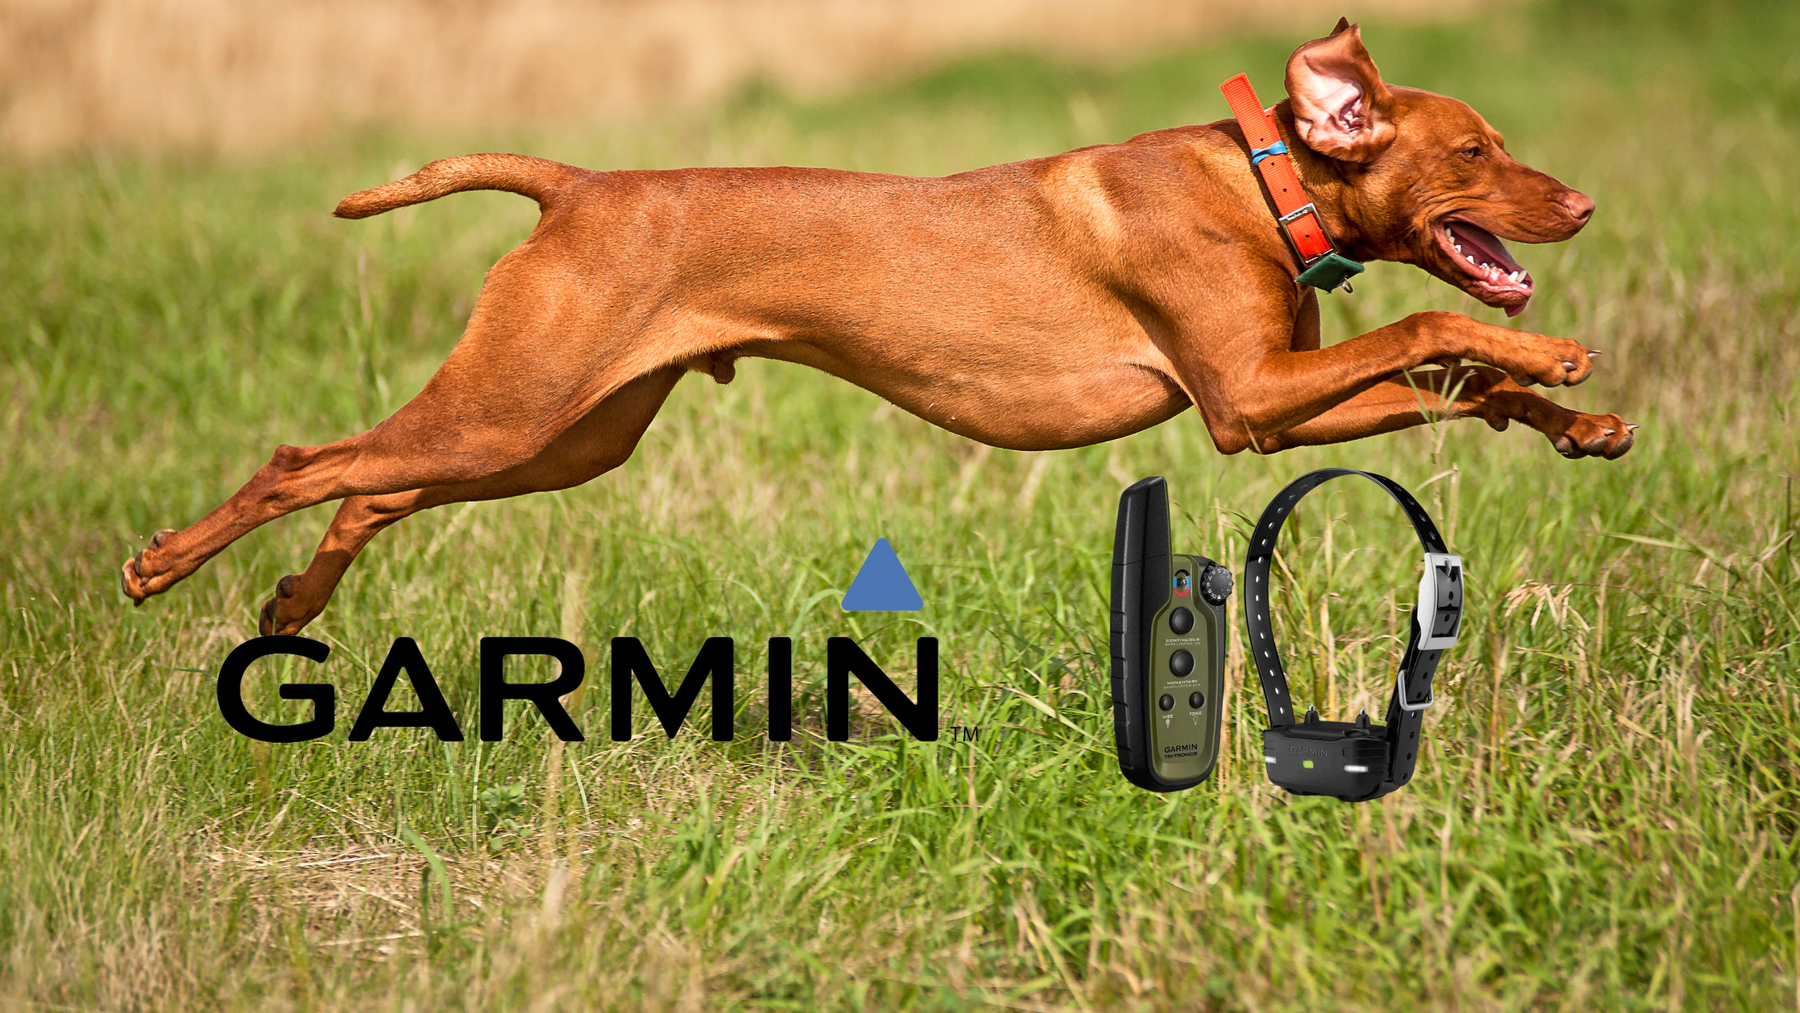 7 Amazing Benefits of the Garmin Dog E Collar You Didn't Know About!